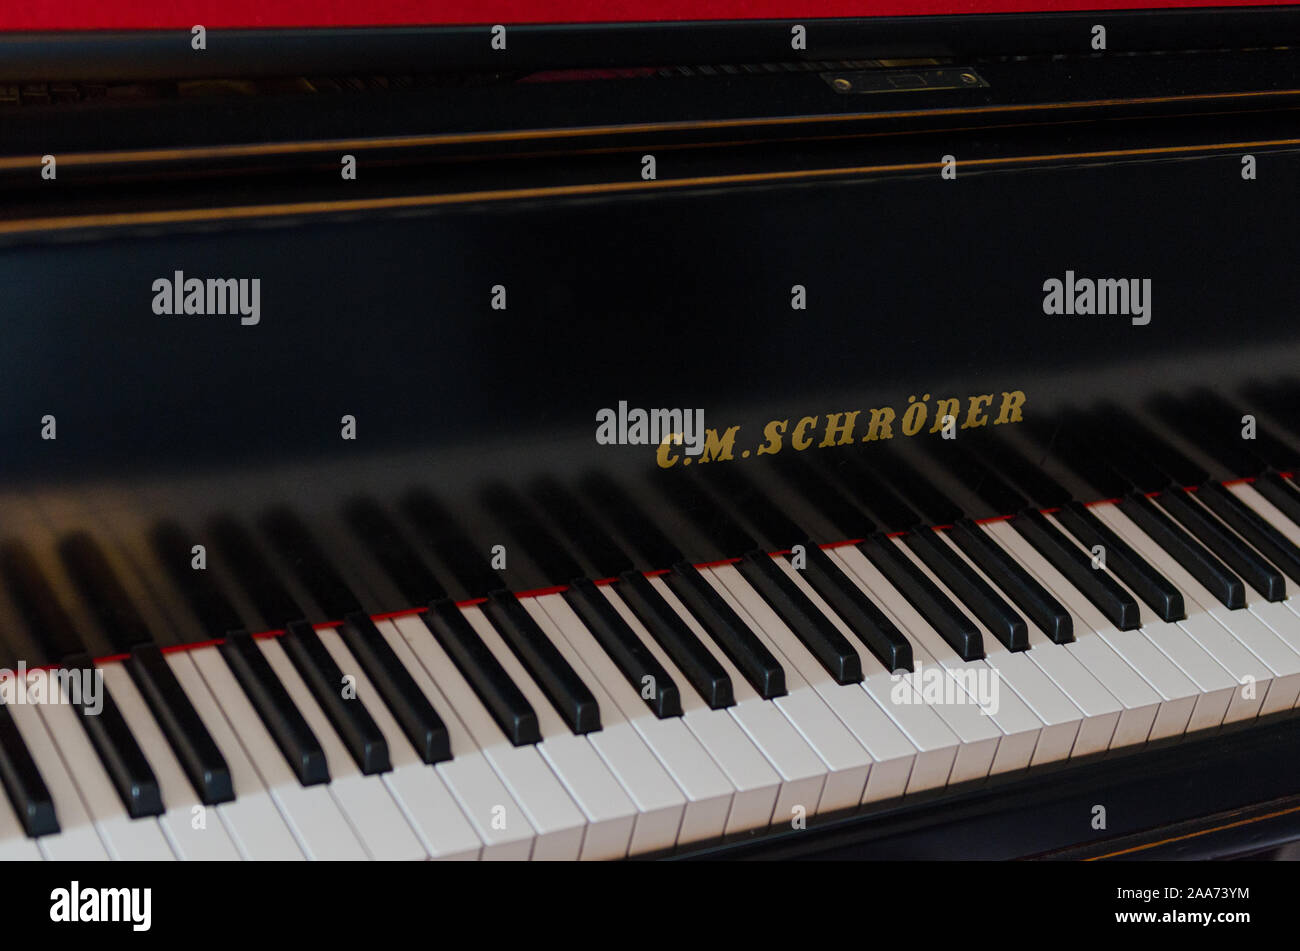 Moscow - Circa August, 2011: Closeup shot of C. M. Schroder piano keys at a  restaurant Stock Photo - Alamy